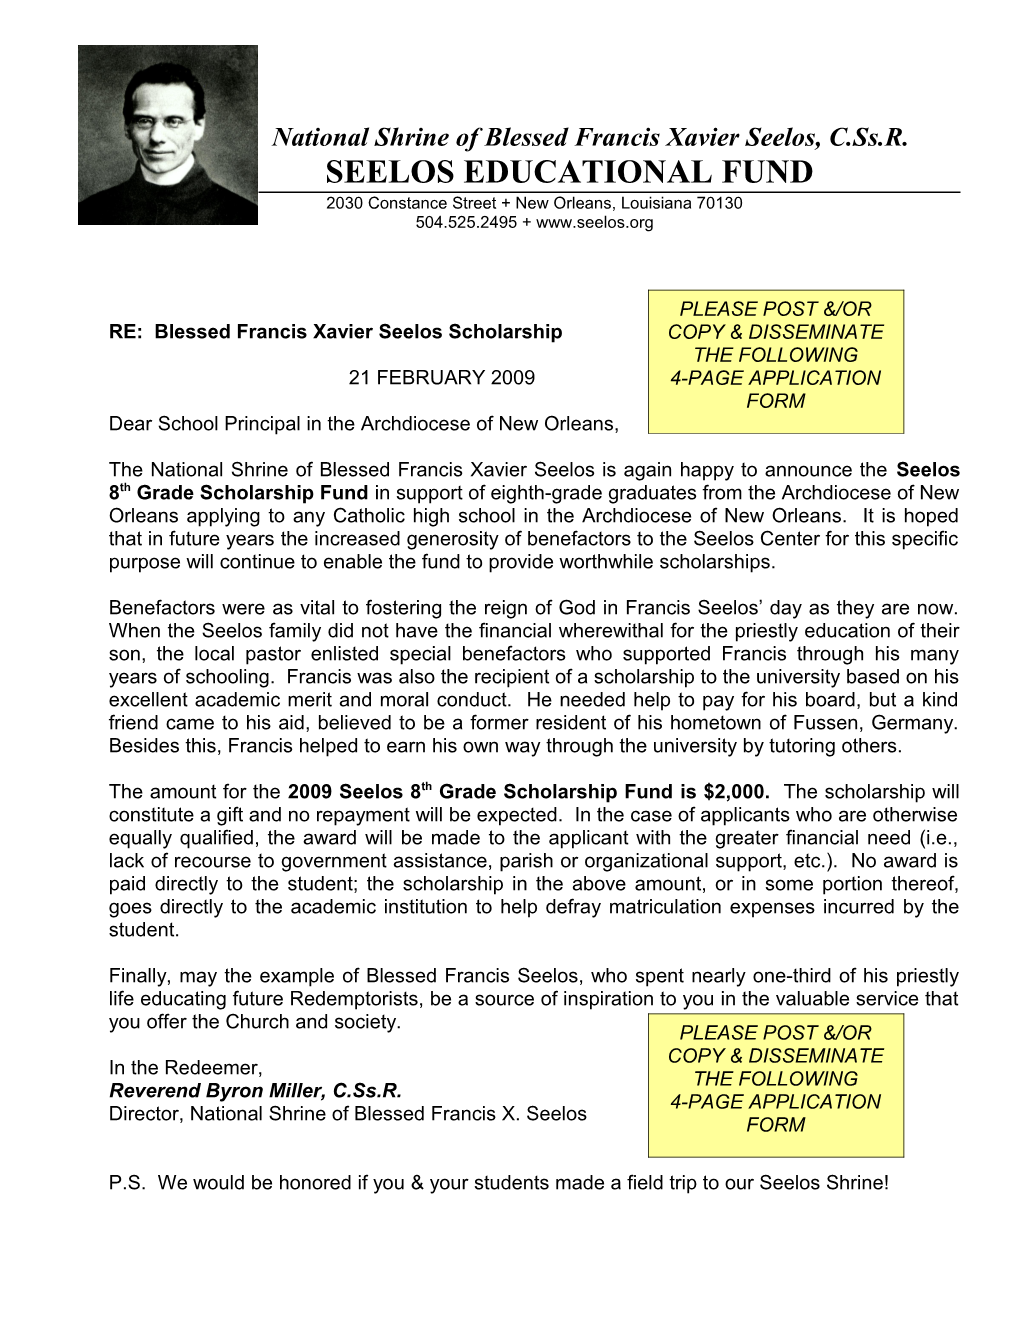 RE: Blessed Francis Xavier Seelos Scholarship